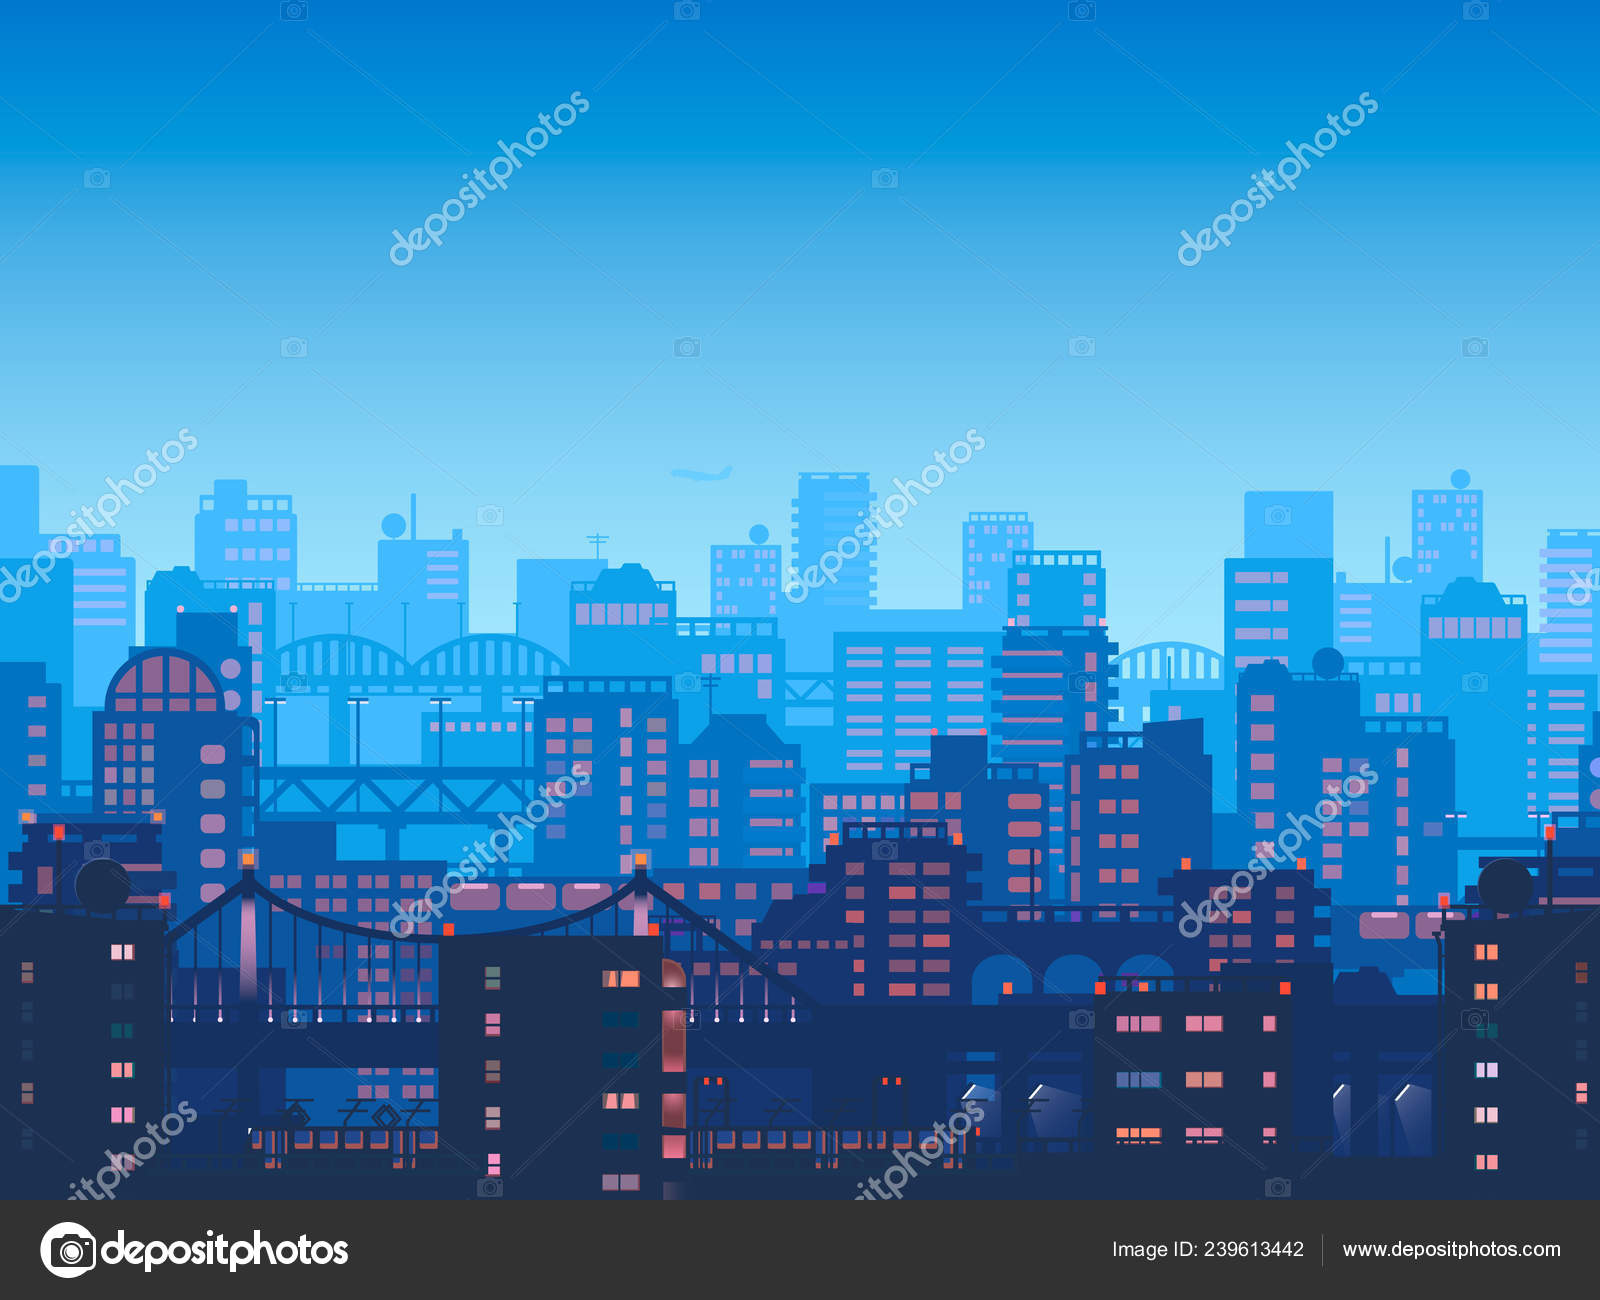 City At Night Town In Flat Style Design Panorama Of The Big City At Night Stock Photo C Reimuss 239613442